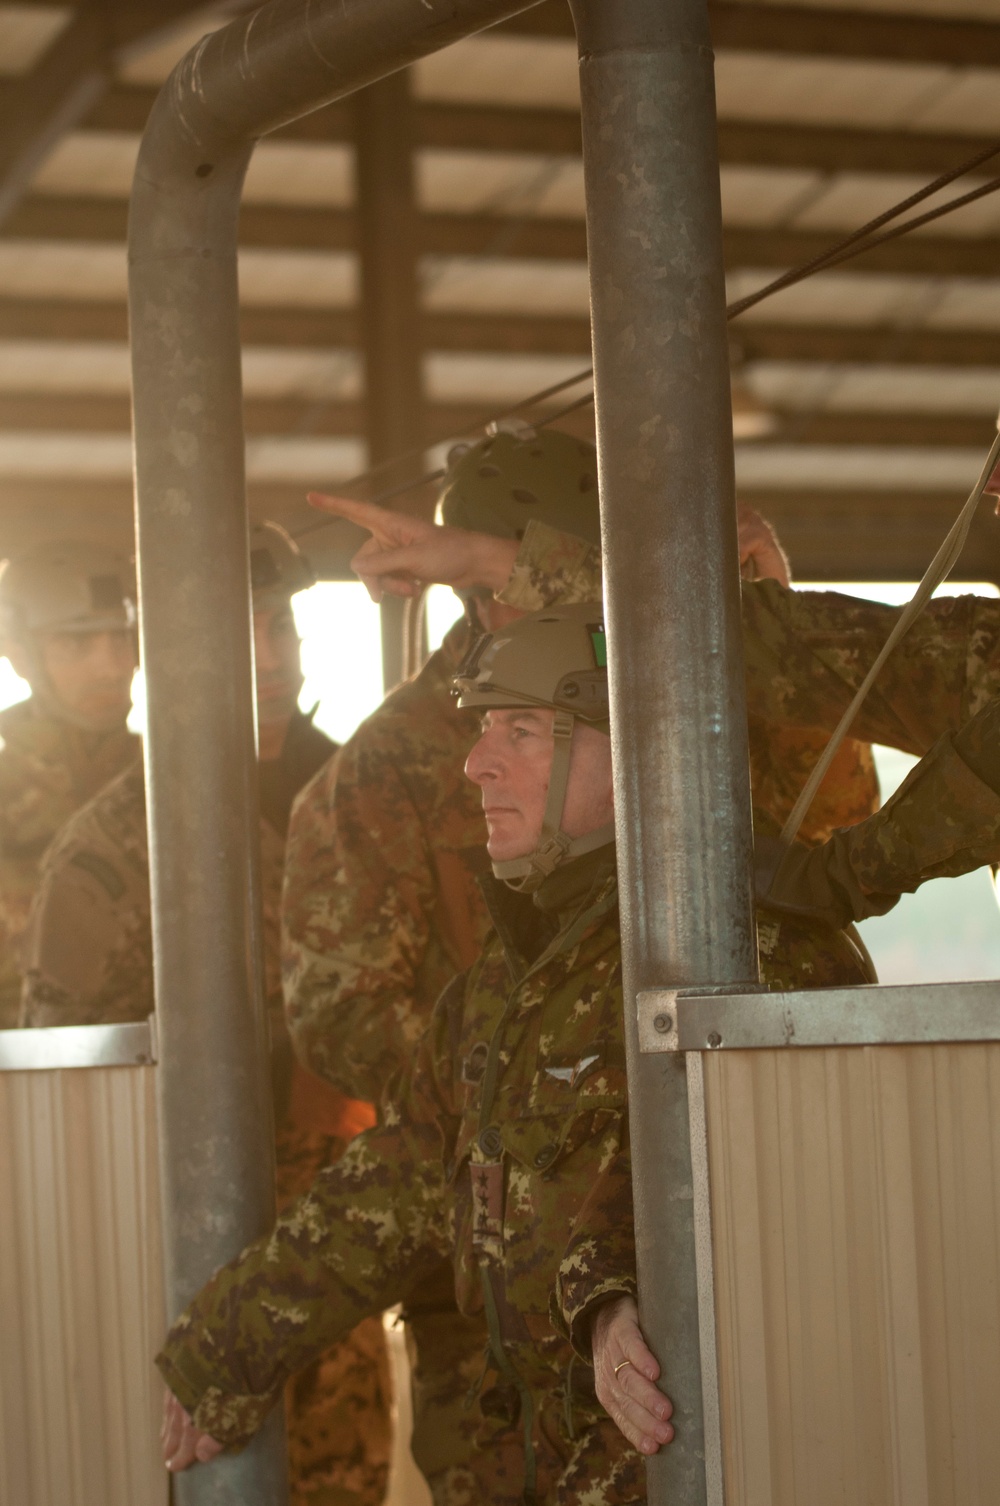 Airborne training conducted and friendships strengthened